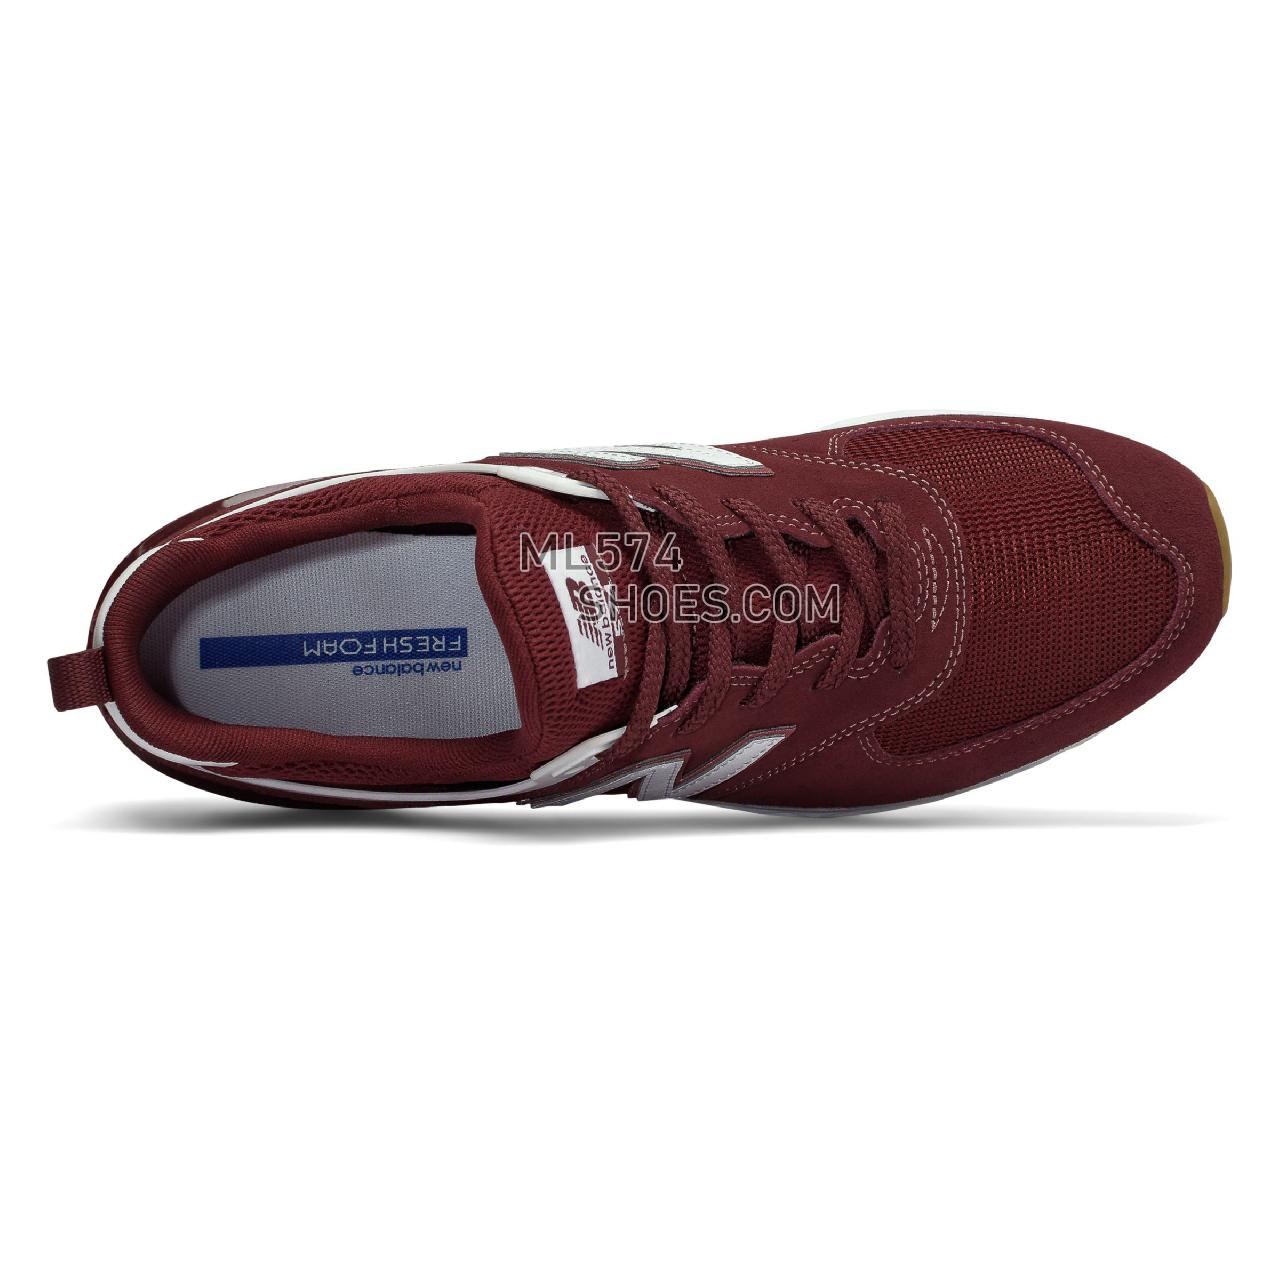 New Balance 574 Sport - Men's 574 - Classic Burgundy with White - MS574FCW